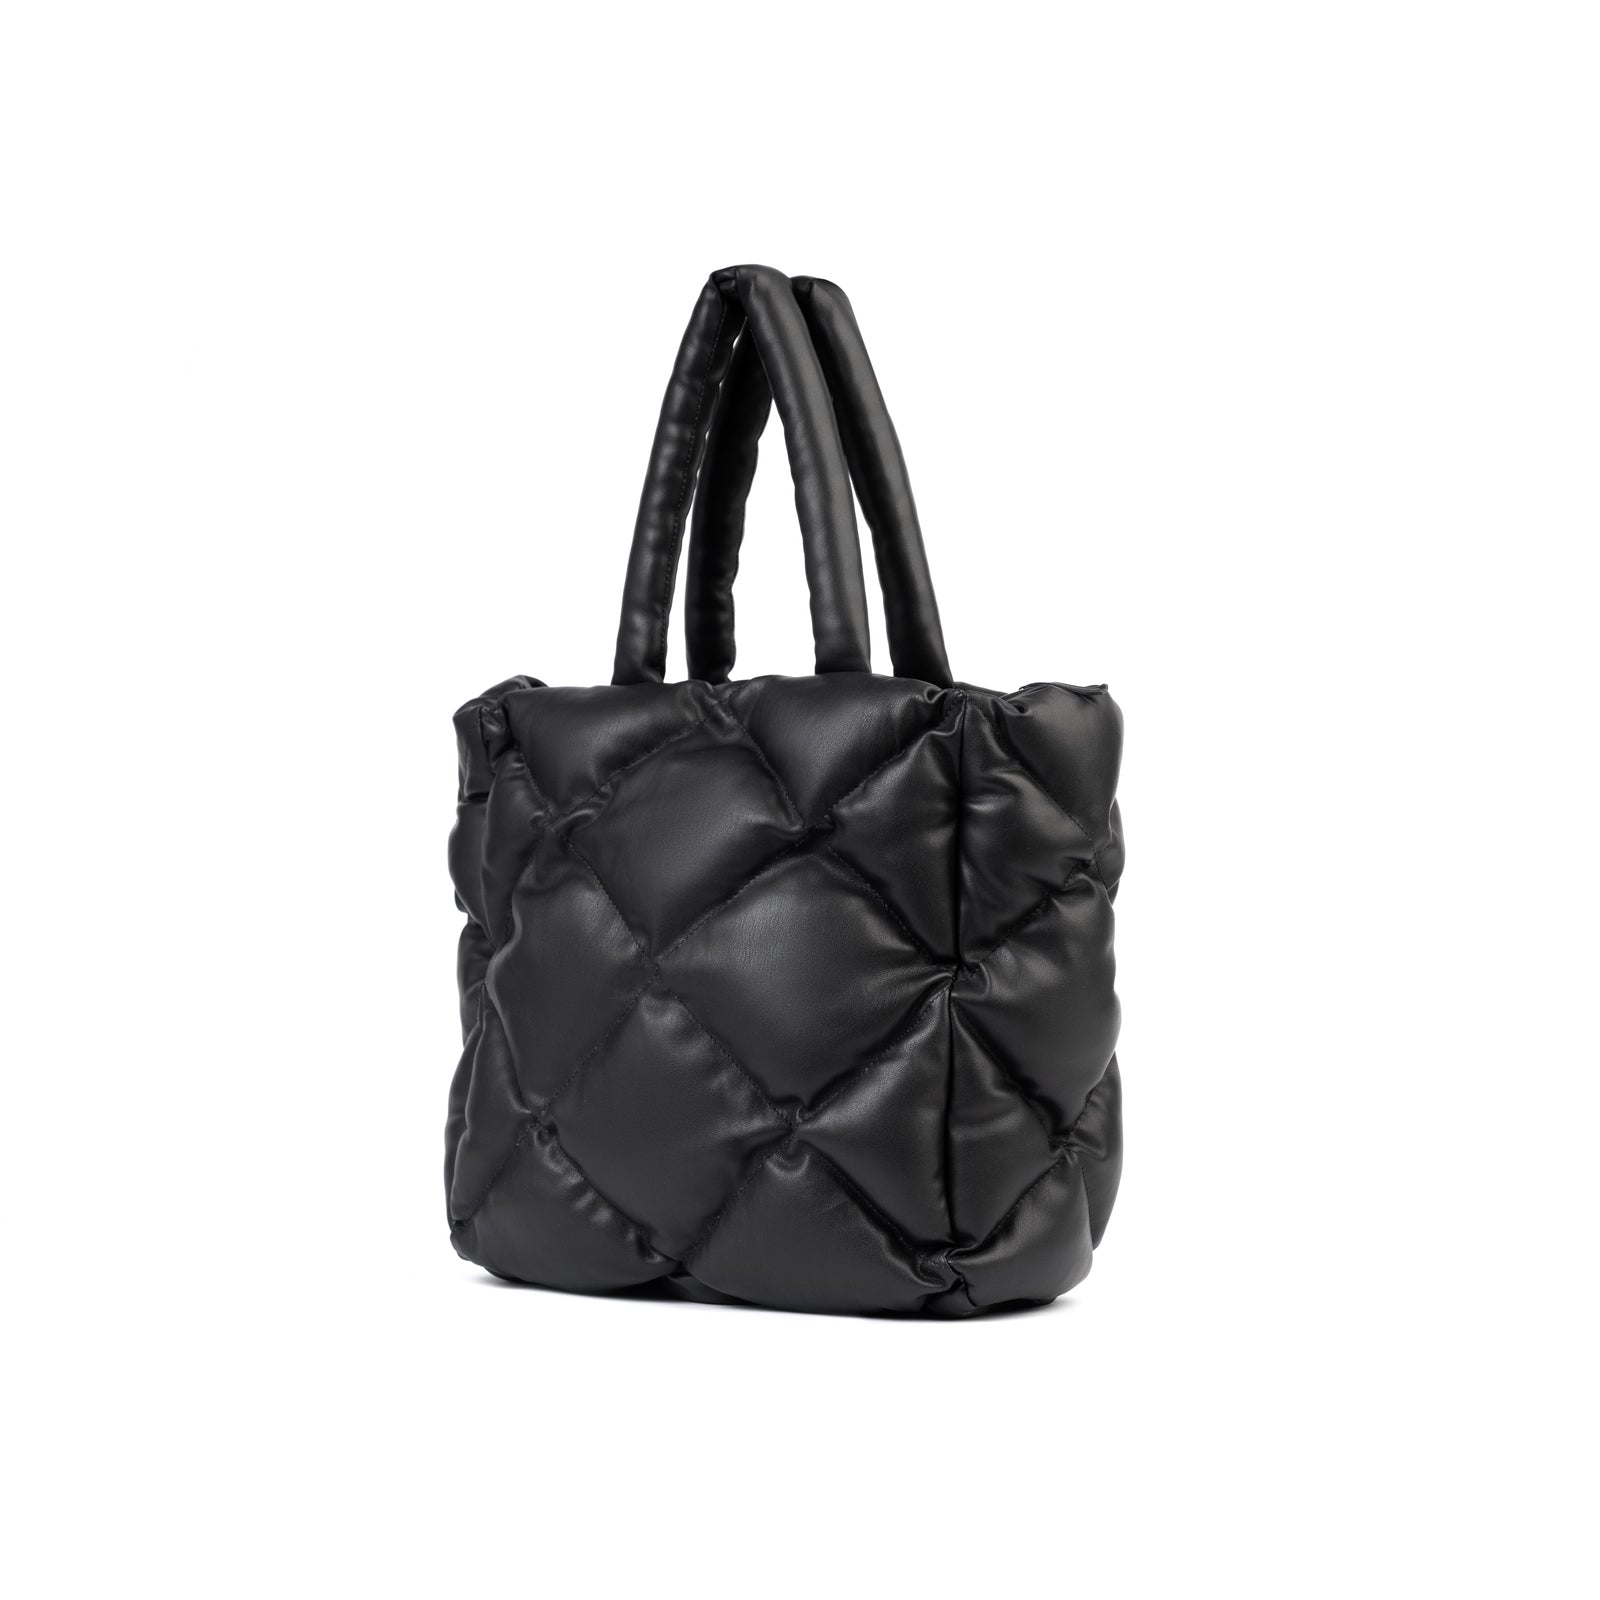 BLACK QUILTED TOTE BAG